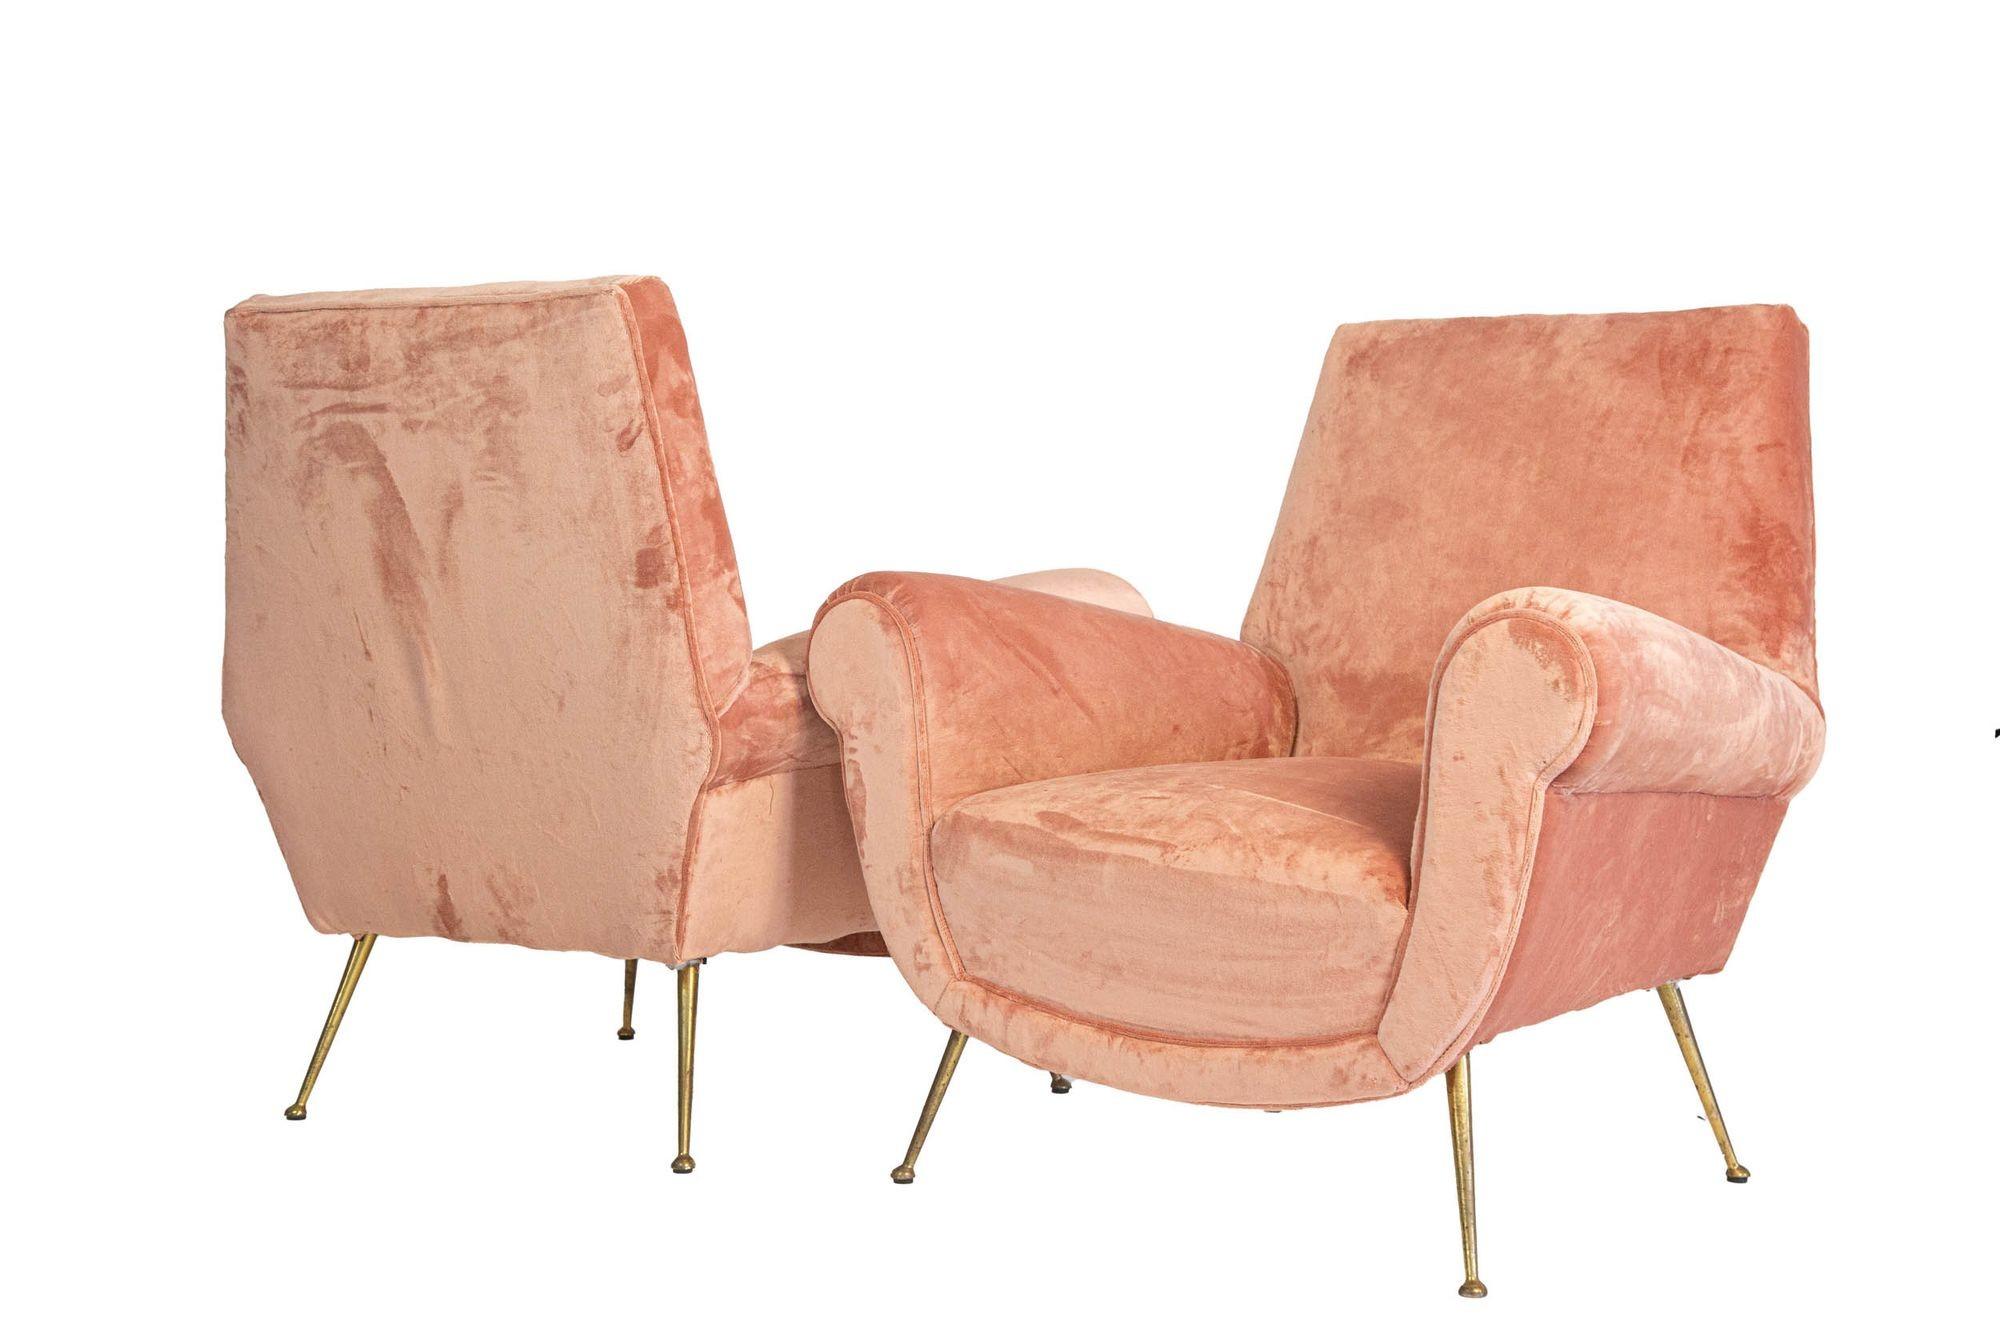 Two armchairs designed by Gigi Radice. Made by Minotti in the 1950s.
From a villa in central Sicily, wood structure was made firm, padding replaced, belts replaced and upholstered with Rubelli rose writing velvet of Martora collection.
Upholsterer